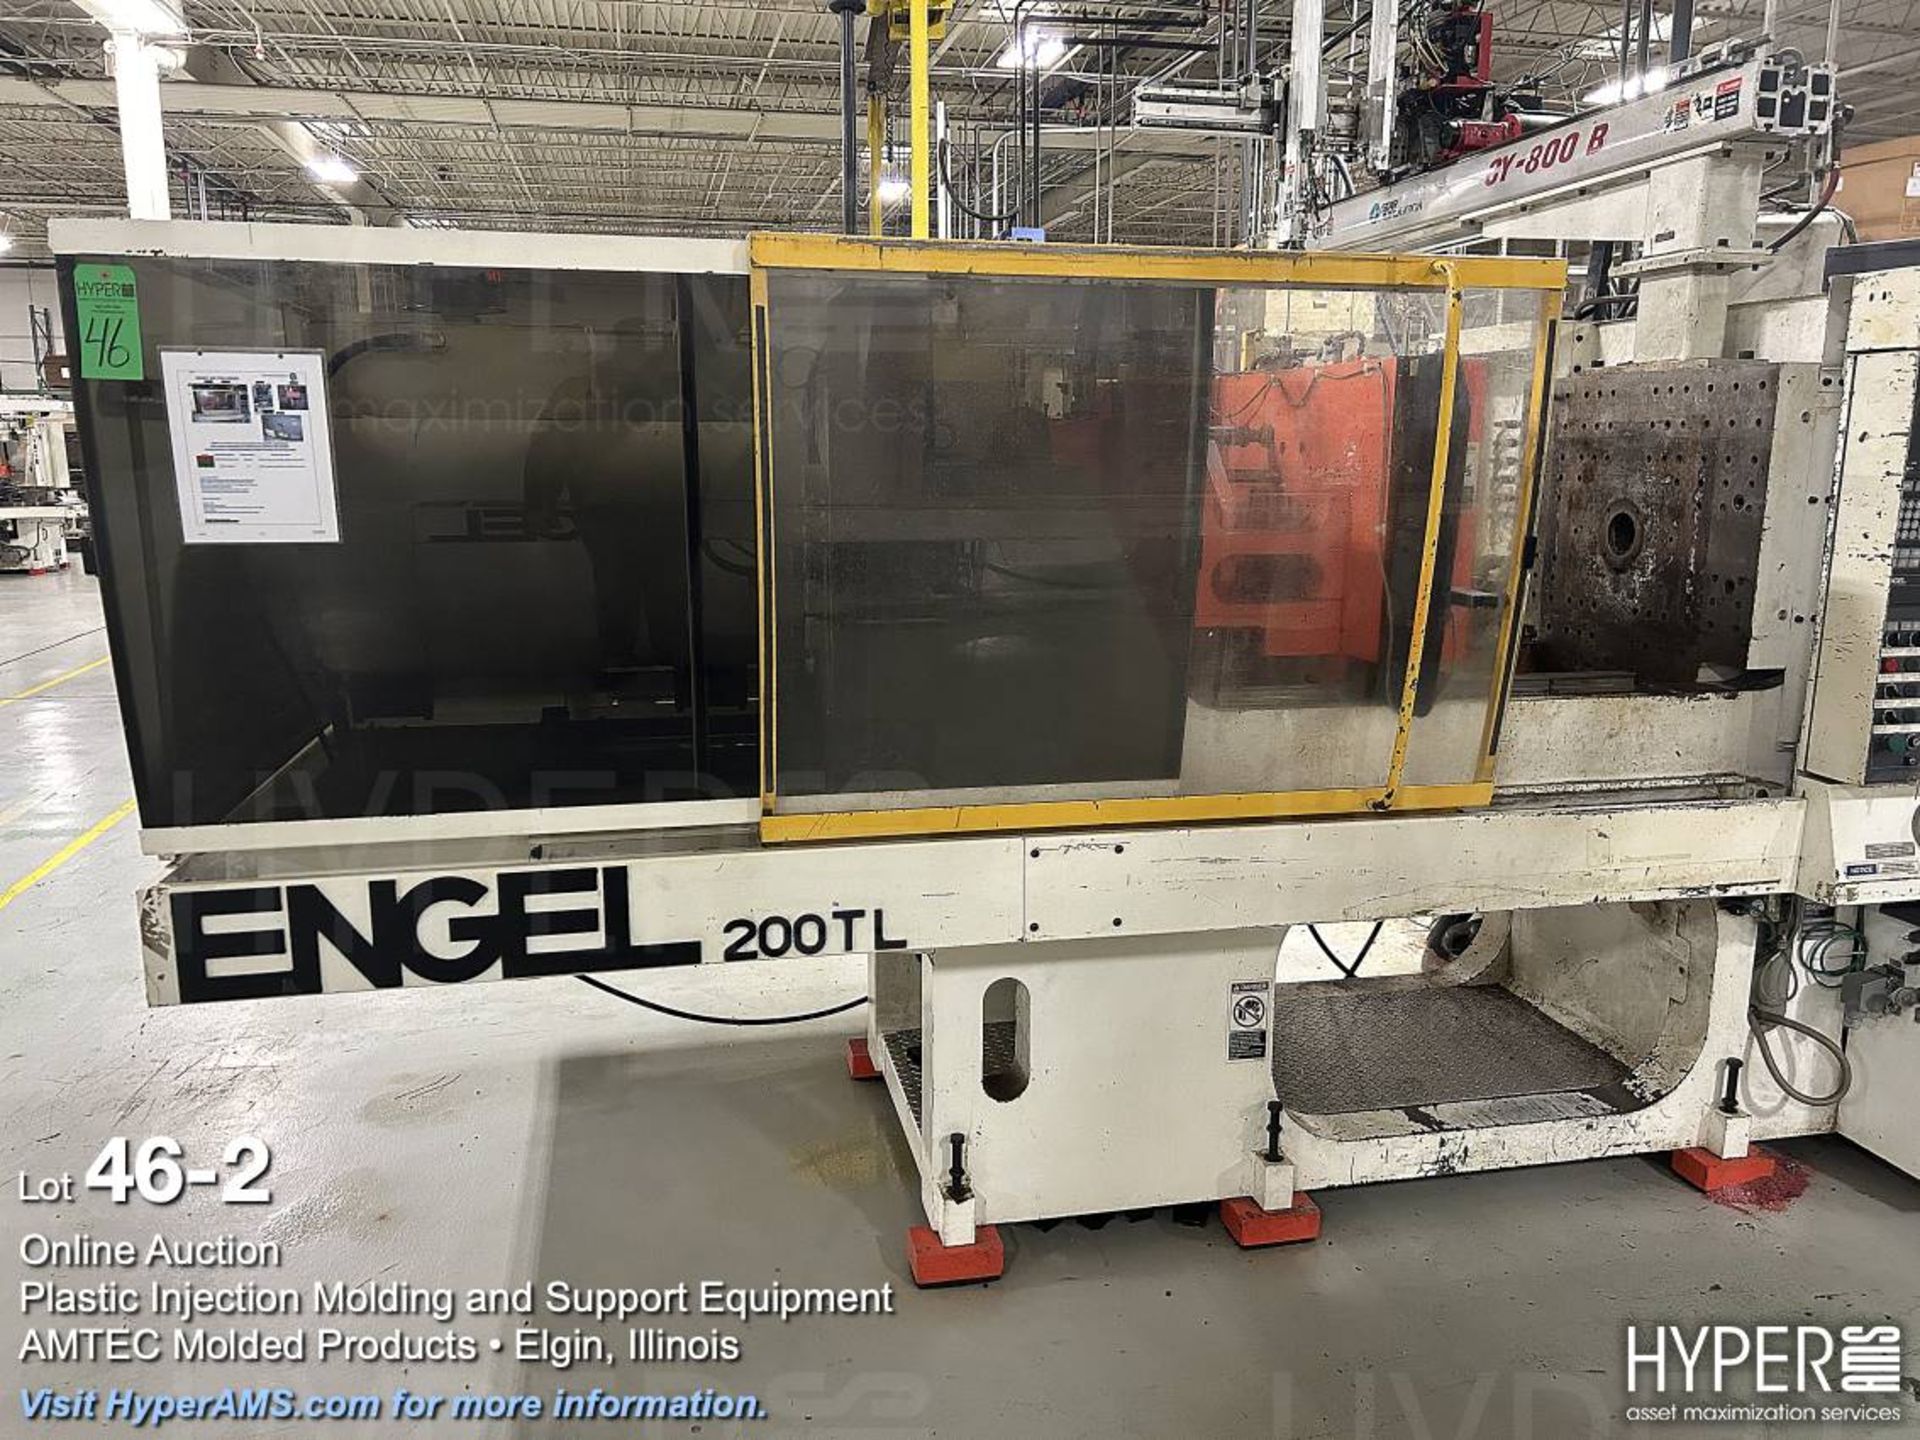 Engel ES1050/200TL toggle clamp plastic injection molding machine - Image 2 of 16